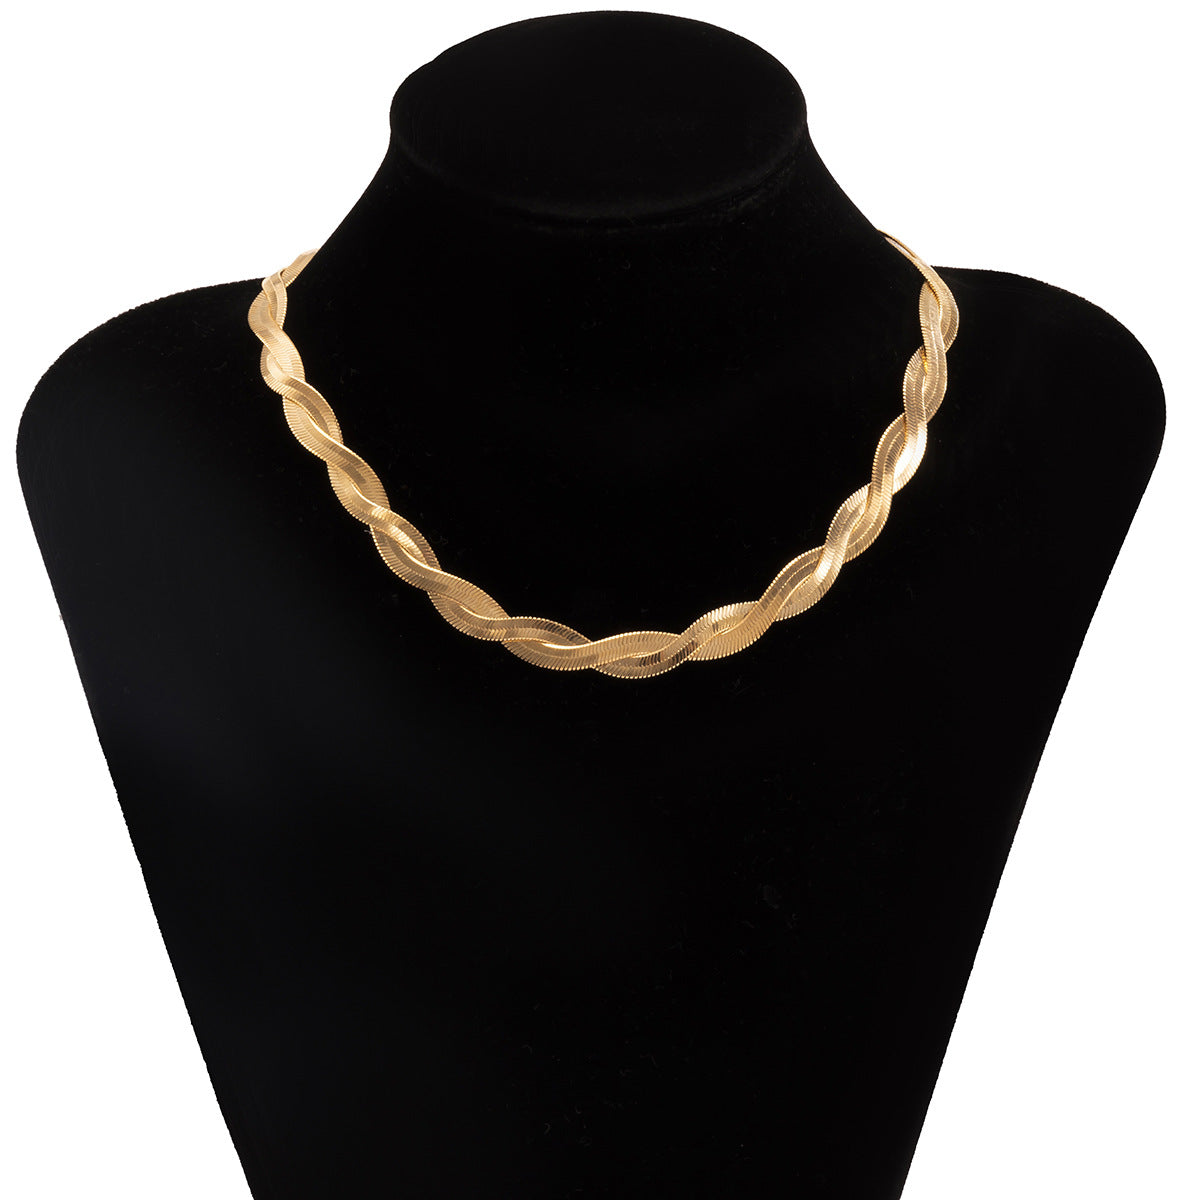 Multilayer Chain Necklace Layered Necklace Snake Necklace Choker - CIVIBUY